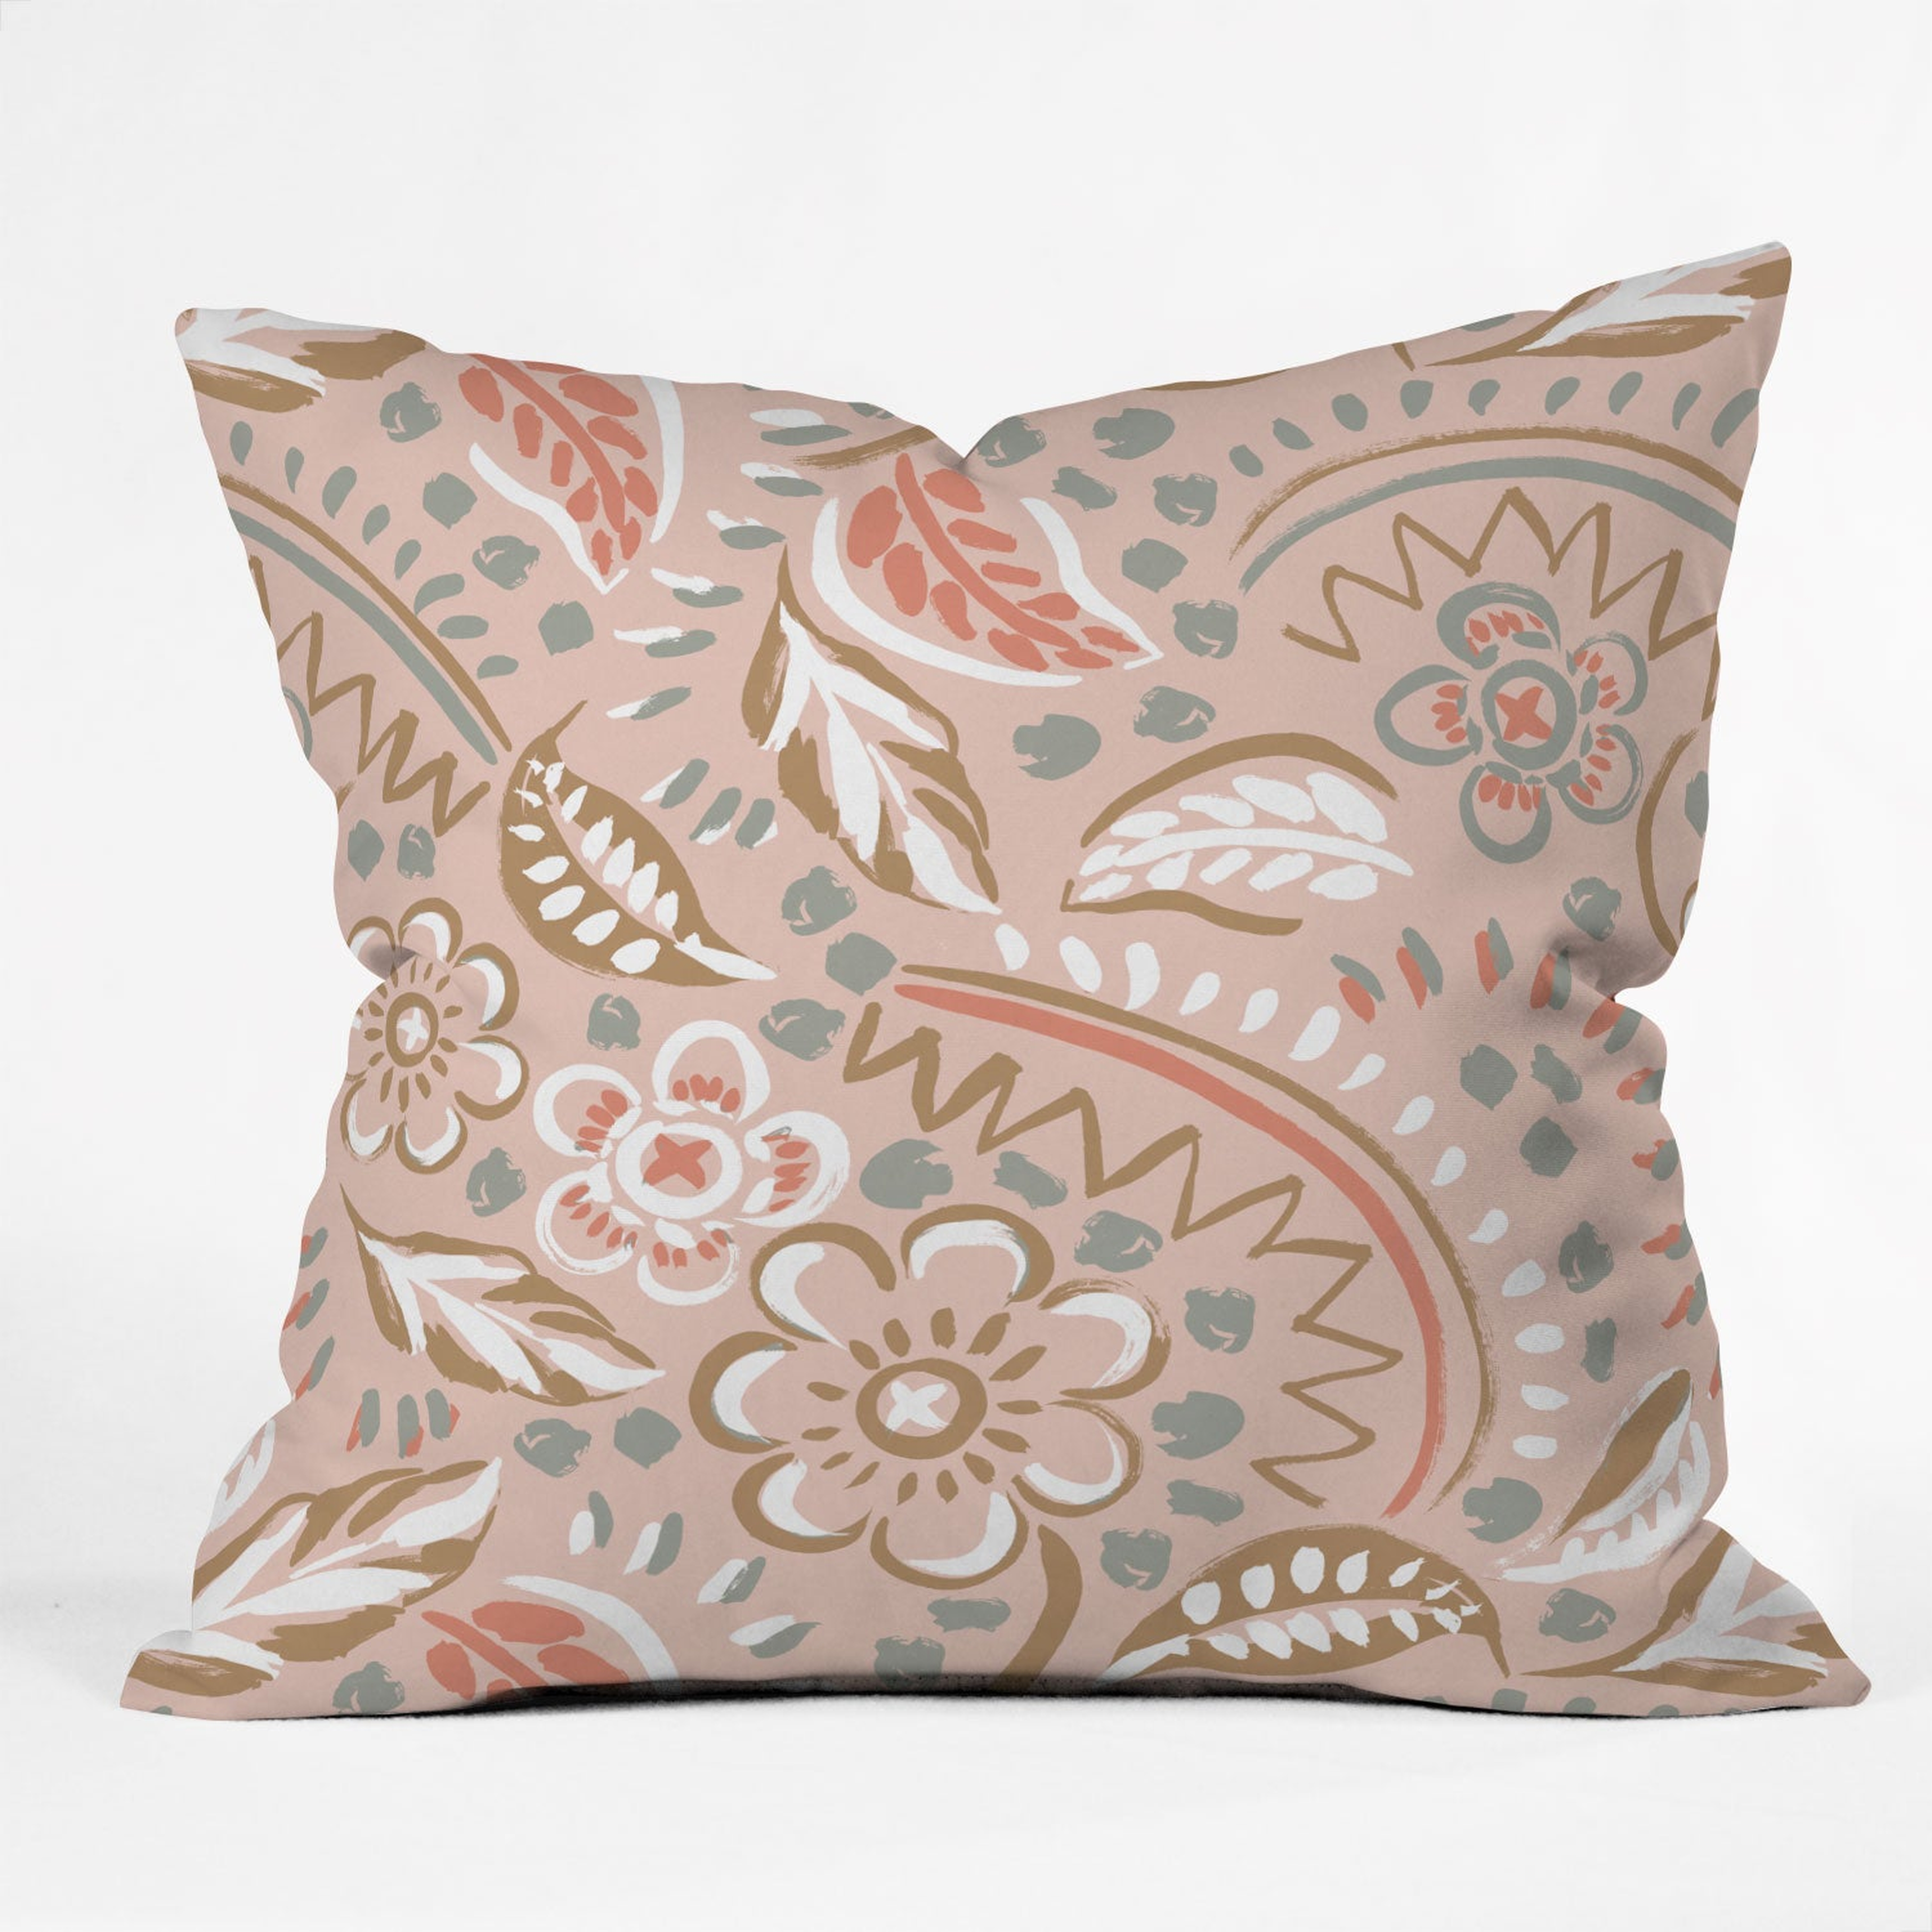 NATIVE FLORAL  BY GABRIELA FUENTE - Outdoor Throw Pillow 20" x 20" - Deny Designs